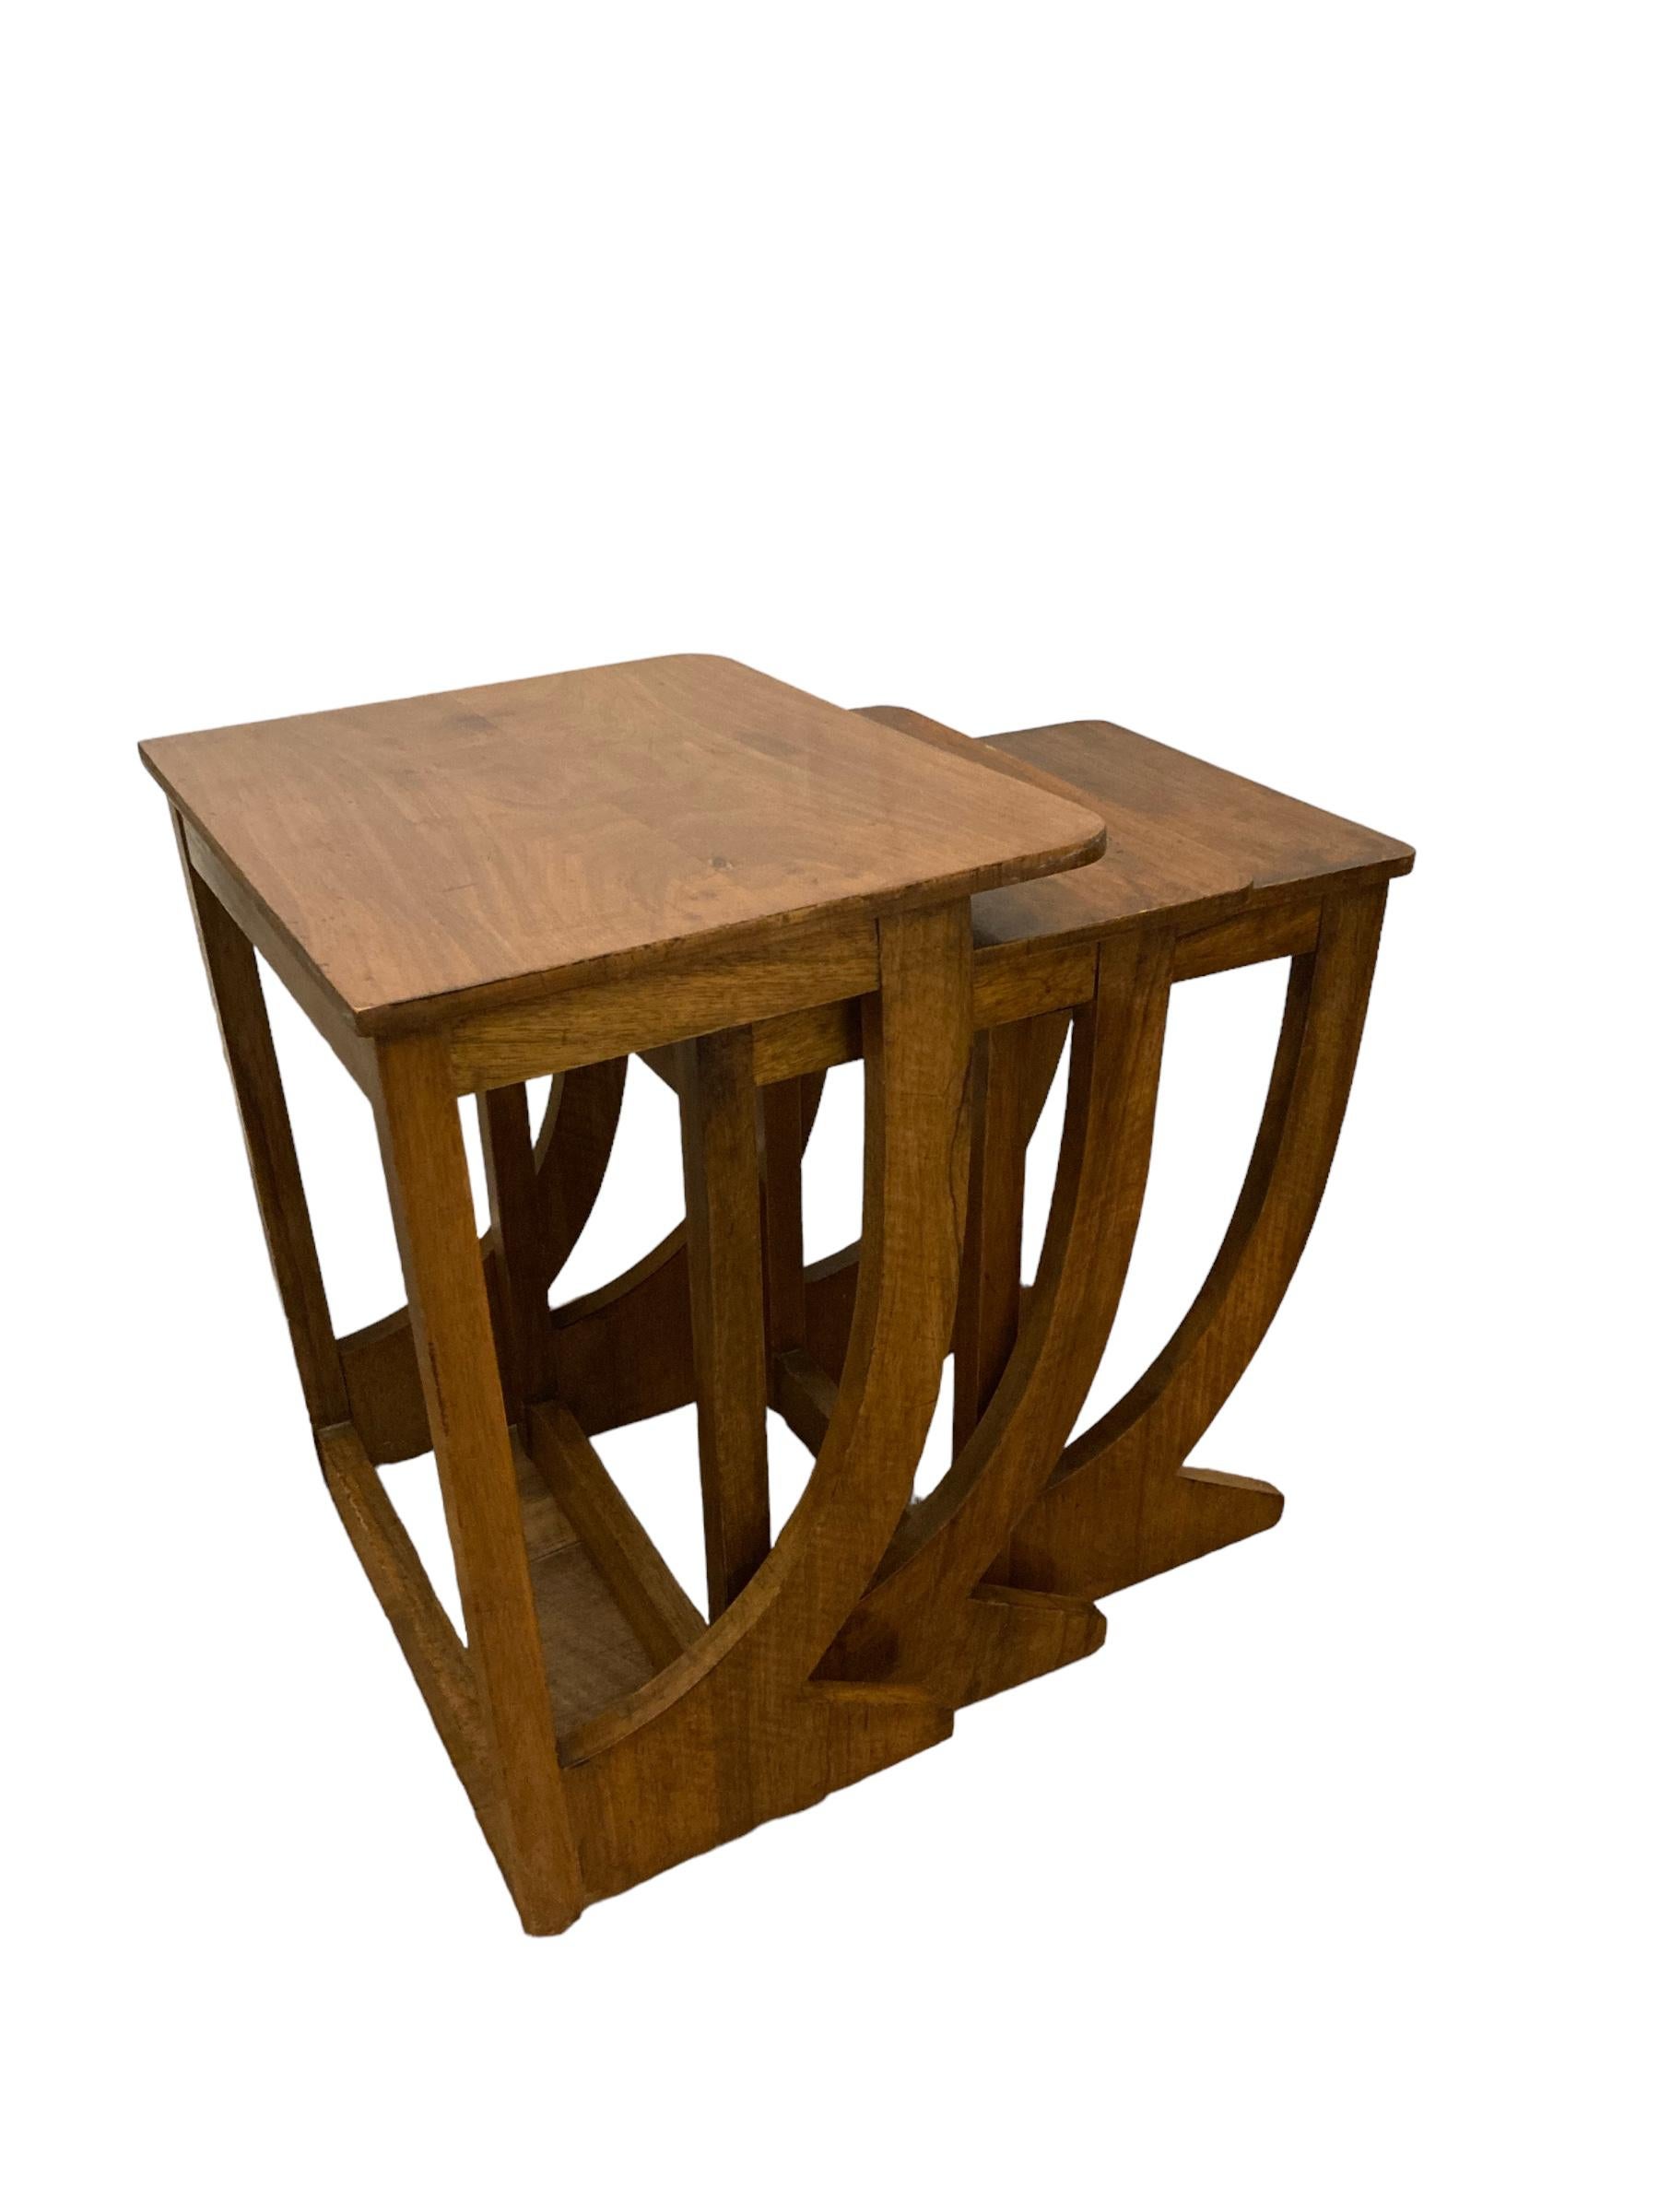 French Art Deco Walnut Nest of Tables In Good Condition For Sale In Bishop's Stortford, GB